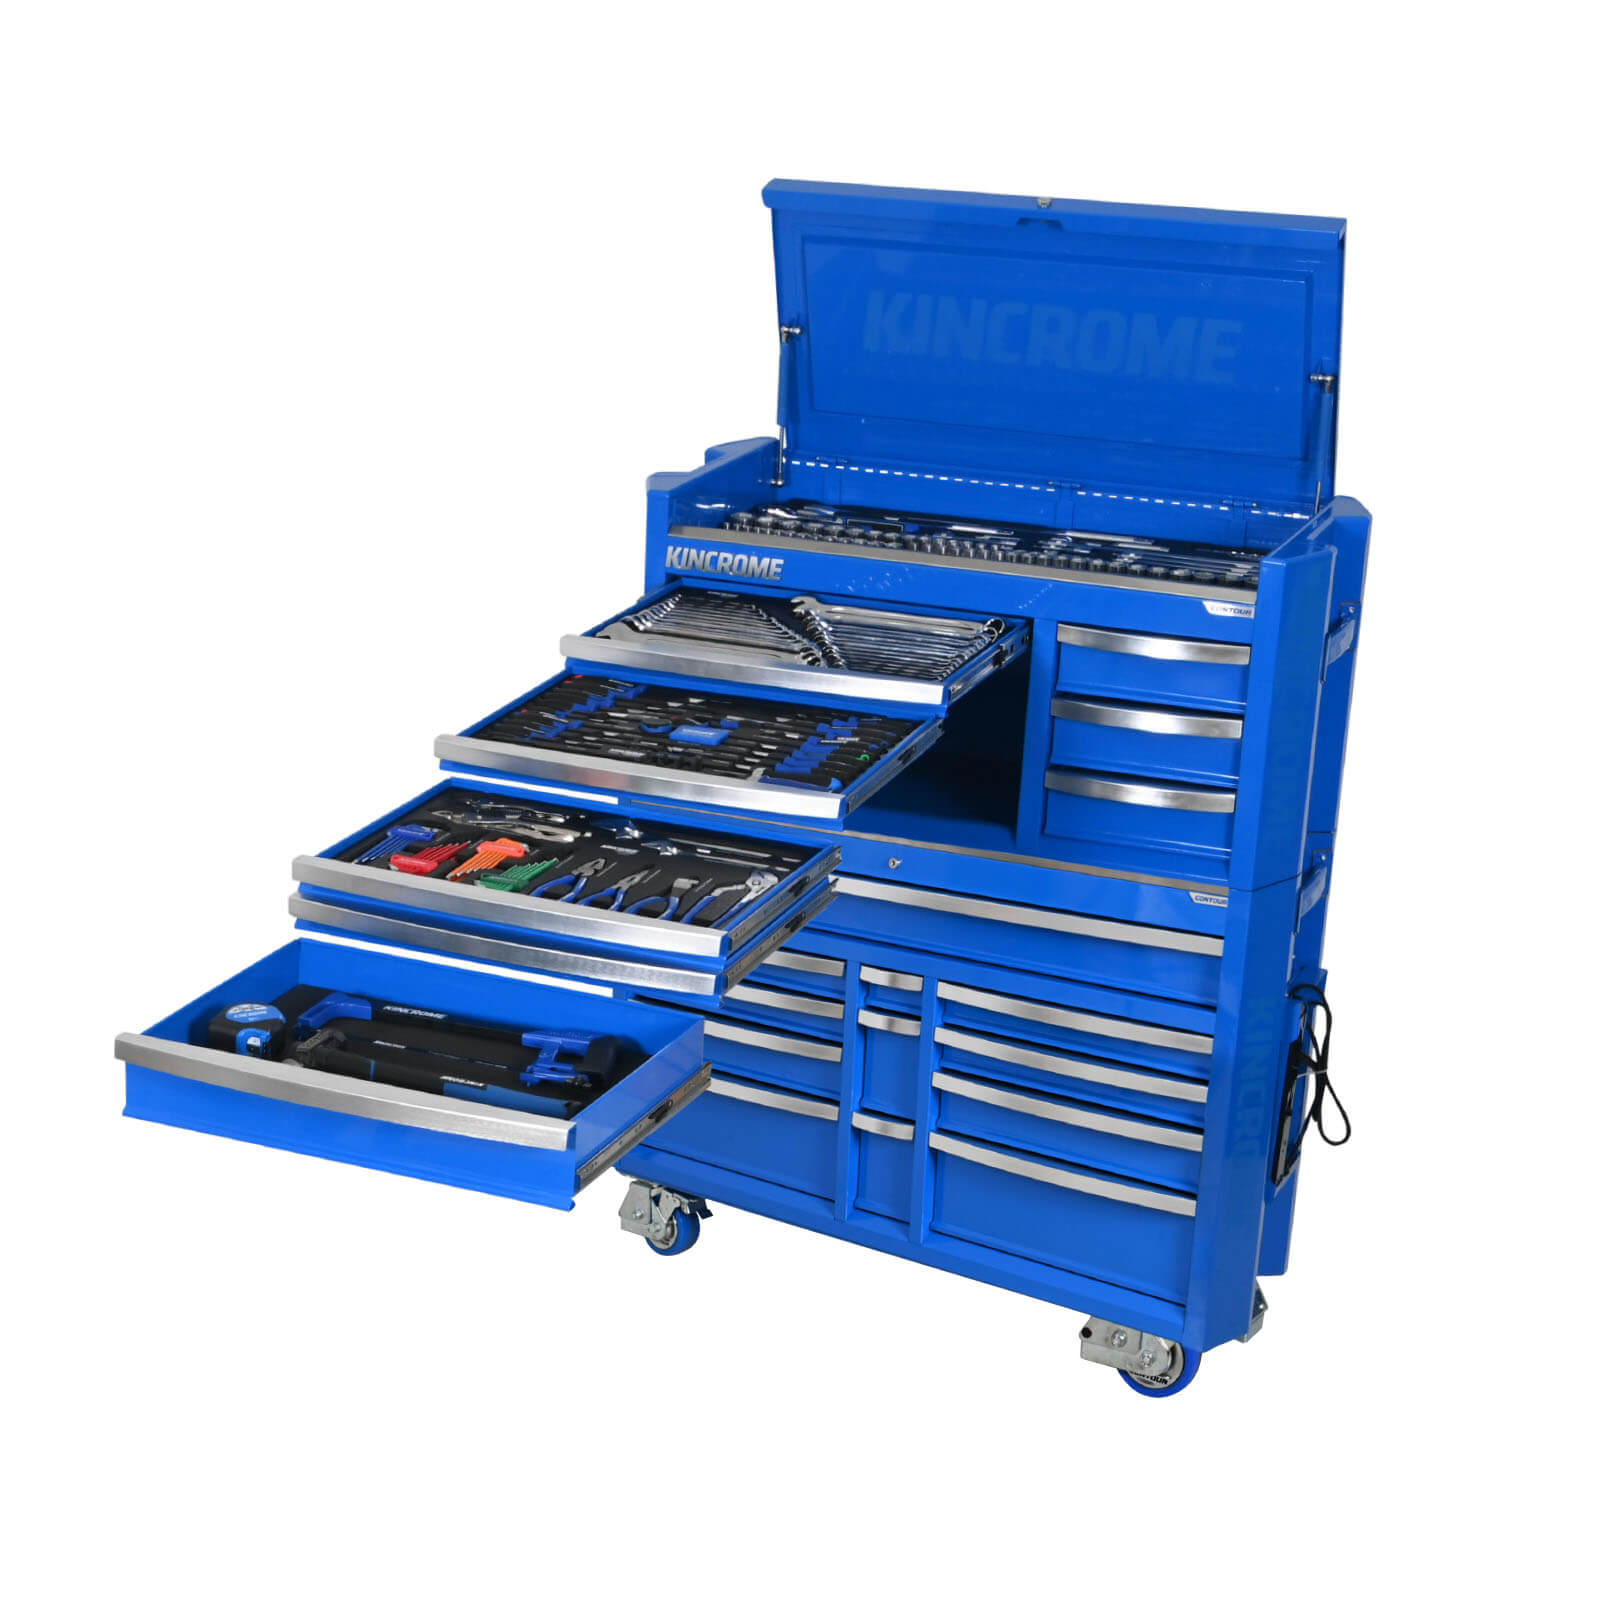 CONTOUR® Workshop Tool Kit 332 Piece 17 Drawer 42" Blue - P1822 by Kincrome